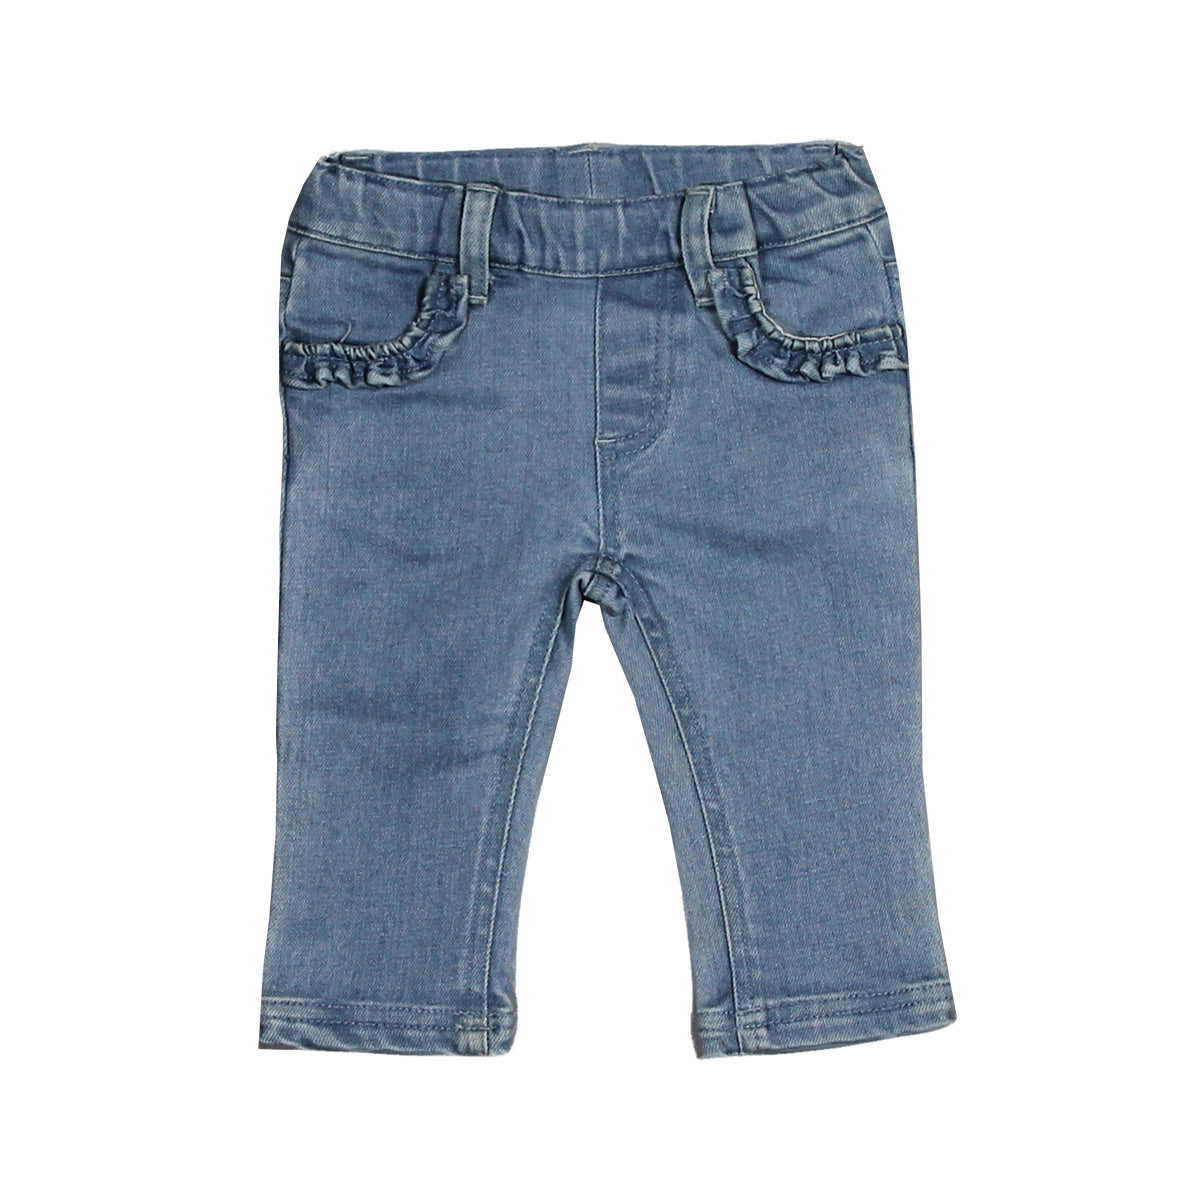 Jeans trousers from the Silvian Heach Kids clothing line, with regular fit and voilants attached ...